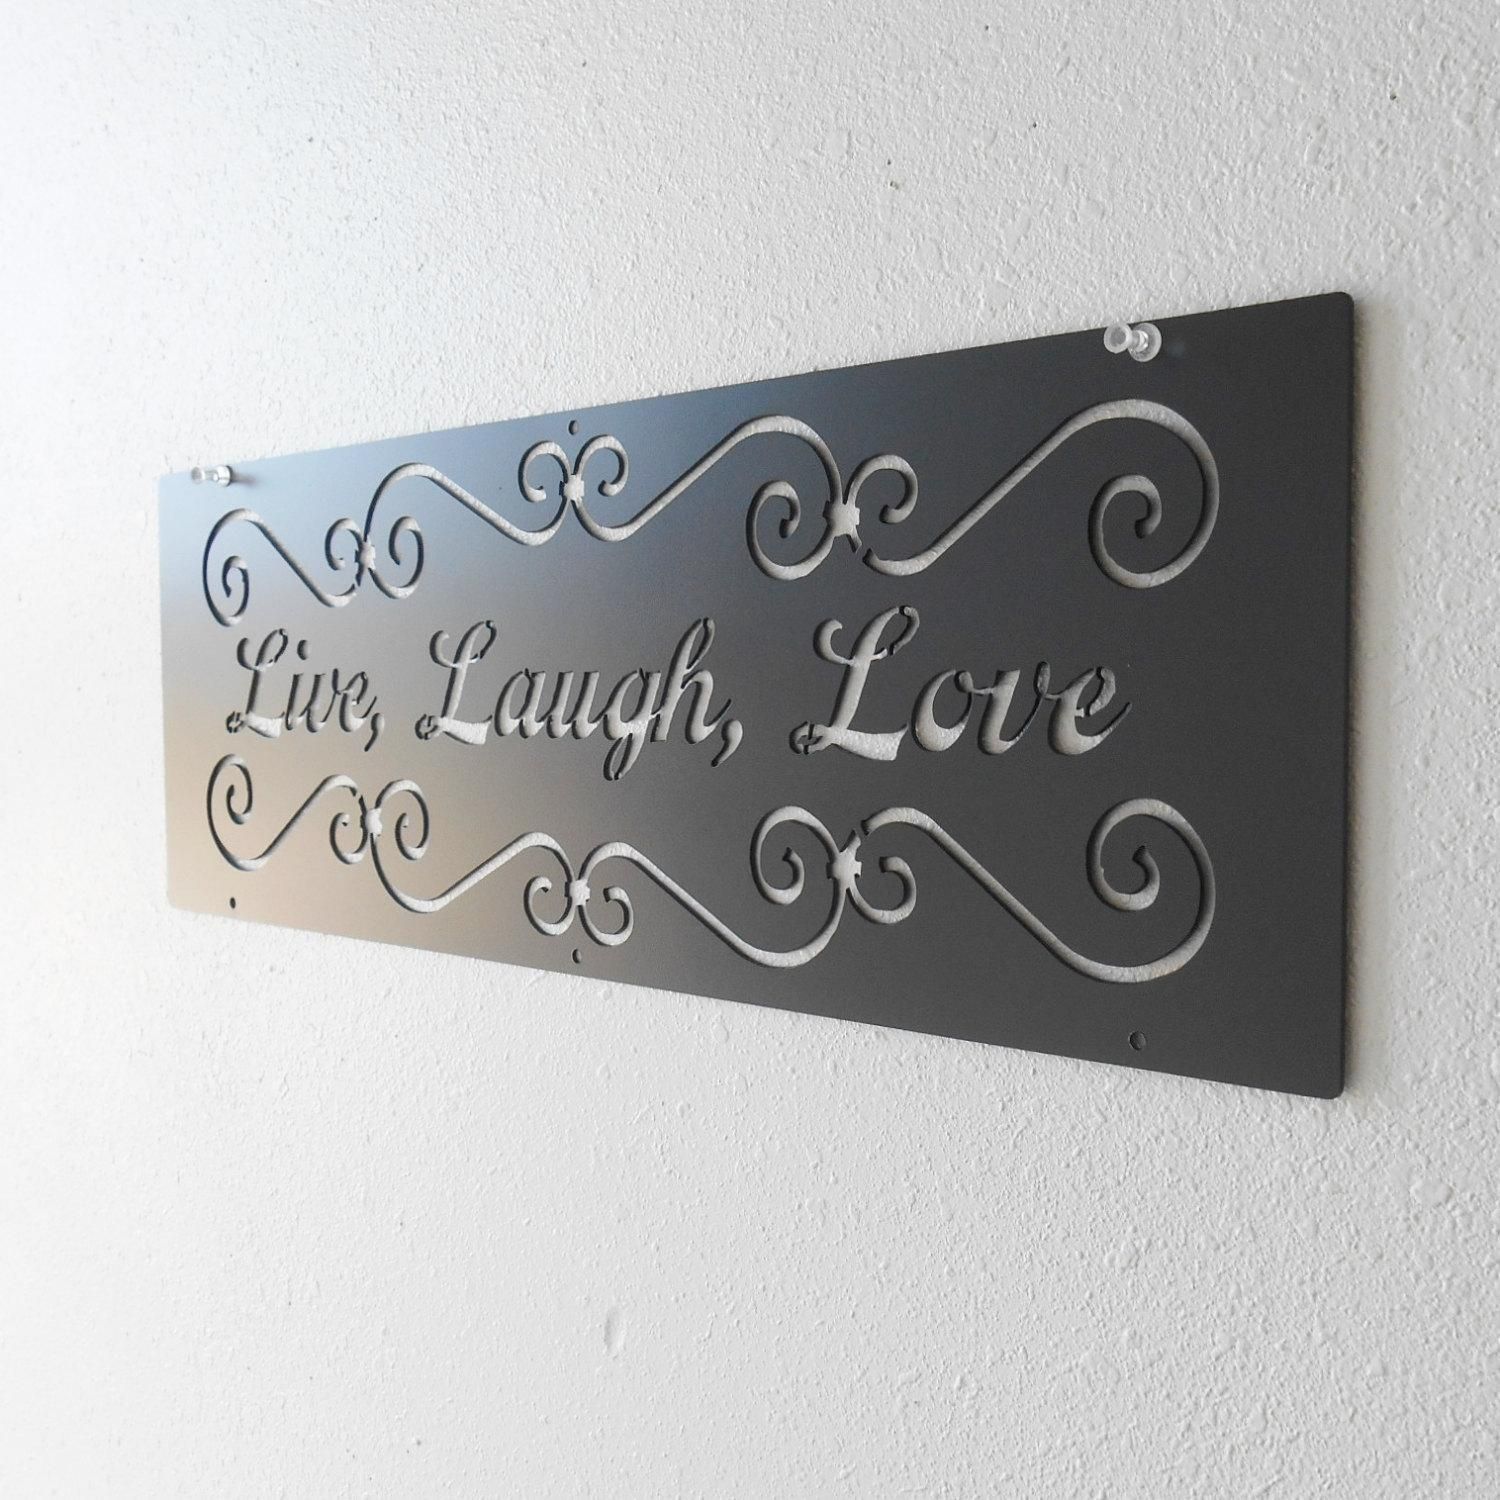 Live Laugh Love / Metal Art / Wall Decoration / Metal Sign / Home Intended For Live Love Laugh Metal Wall Art (View 13 of 20)